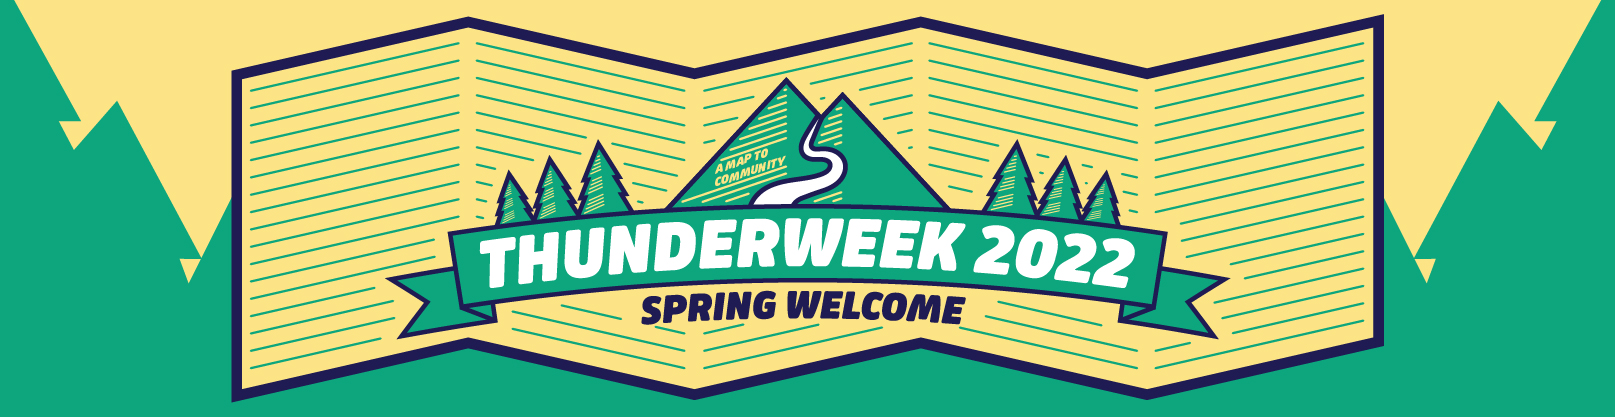 ThunderWeek Spring Welcome 2022, map imagery with trees and mountain path